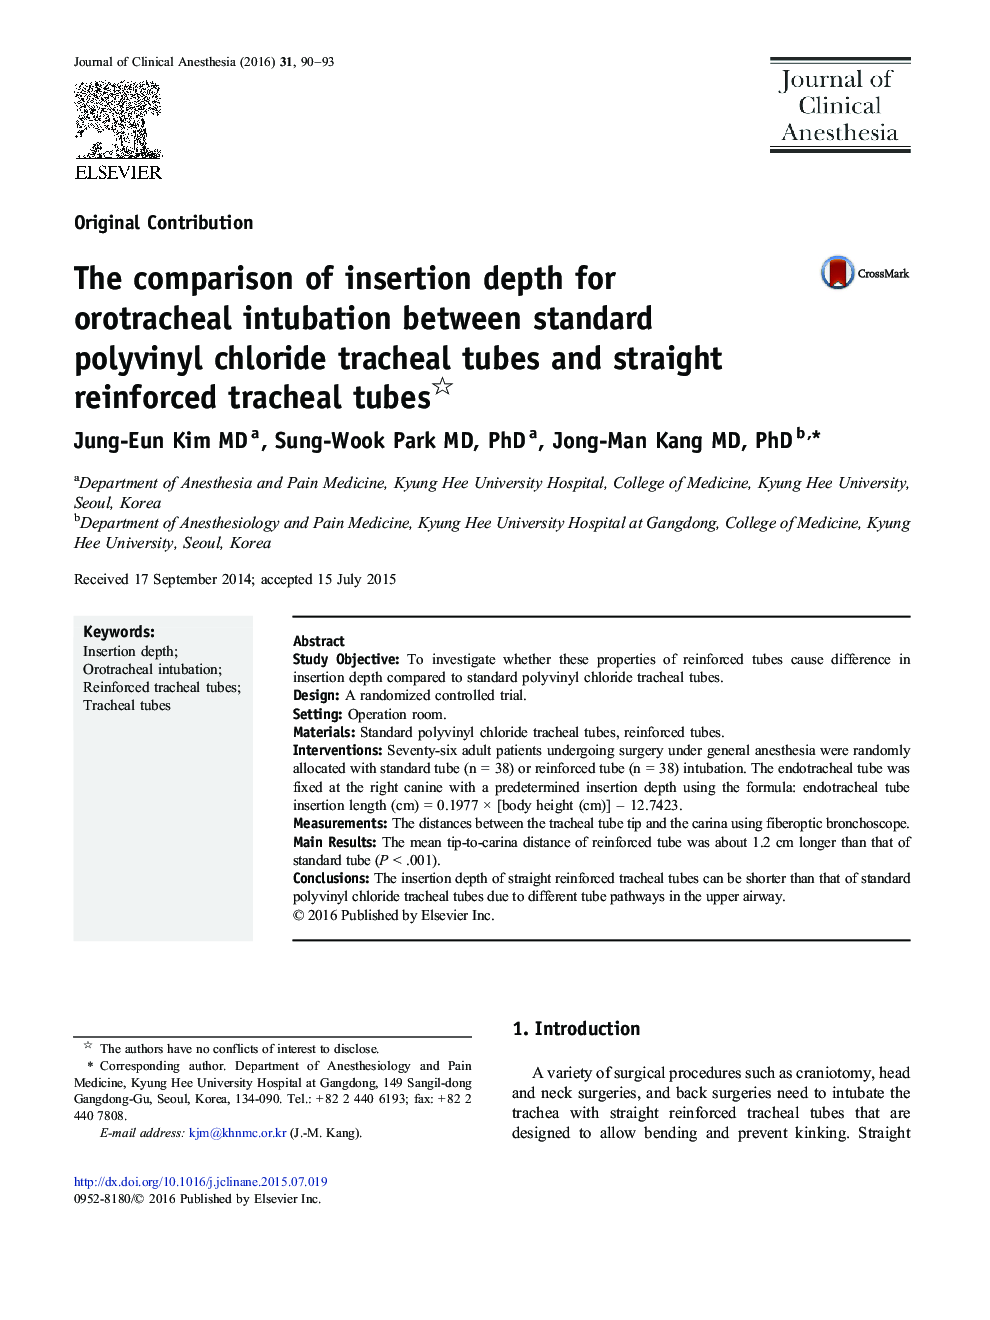 The comparison of insertion depth for orotracheal intubation between standard polyvinyl chloride tracheal tubes and straight reinforced tracheal tubes